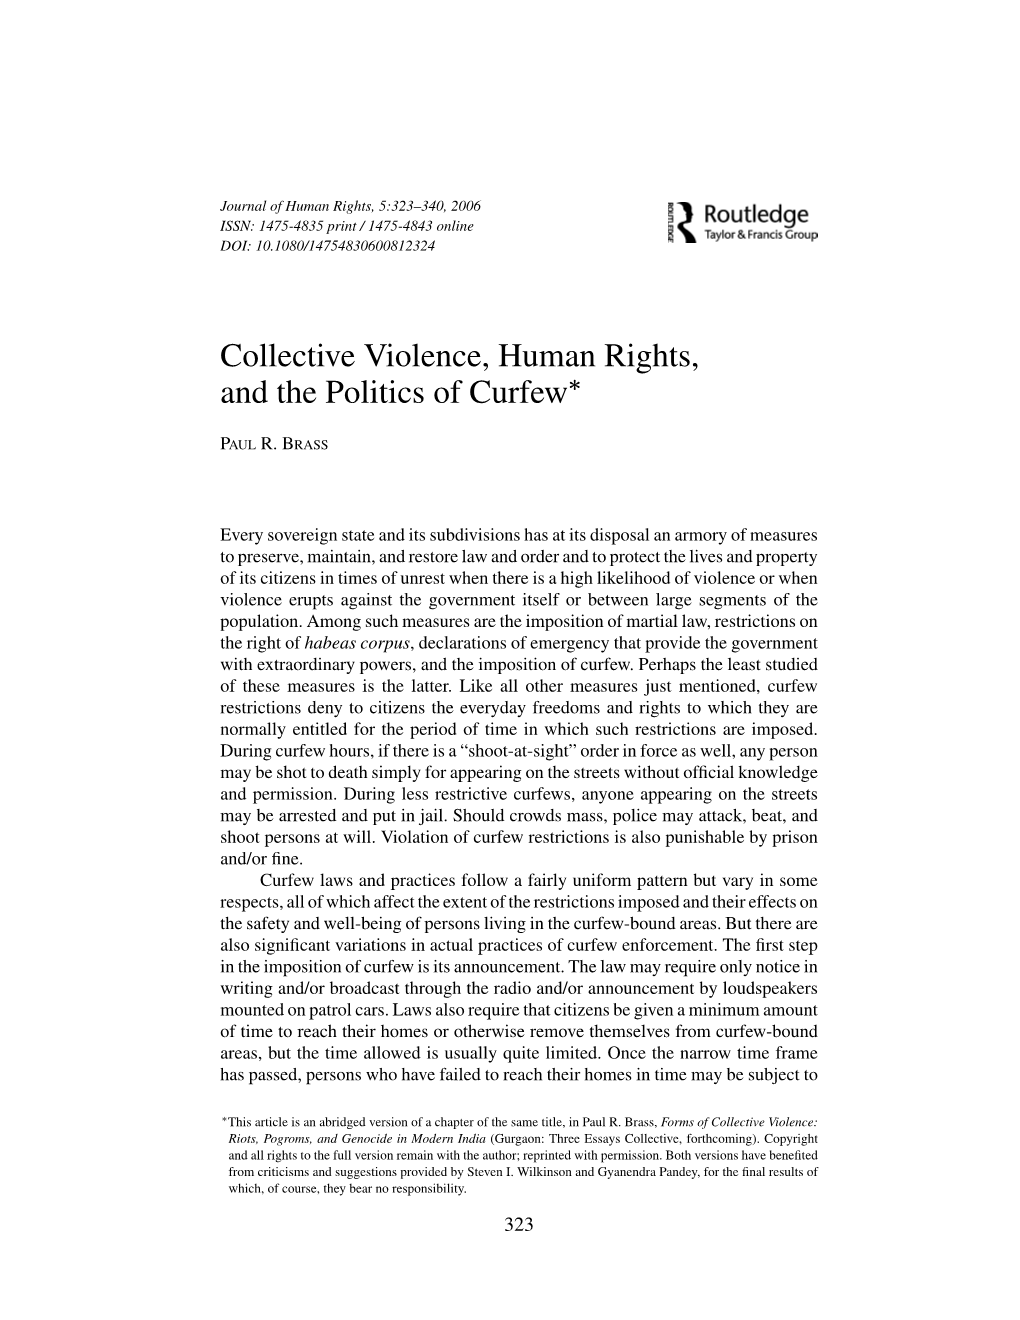 Collective Violence, Human Rights, and the Politics of Curfew∗